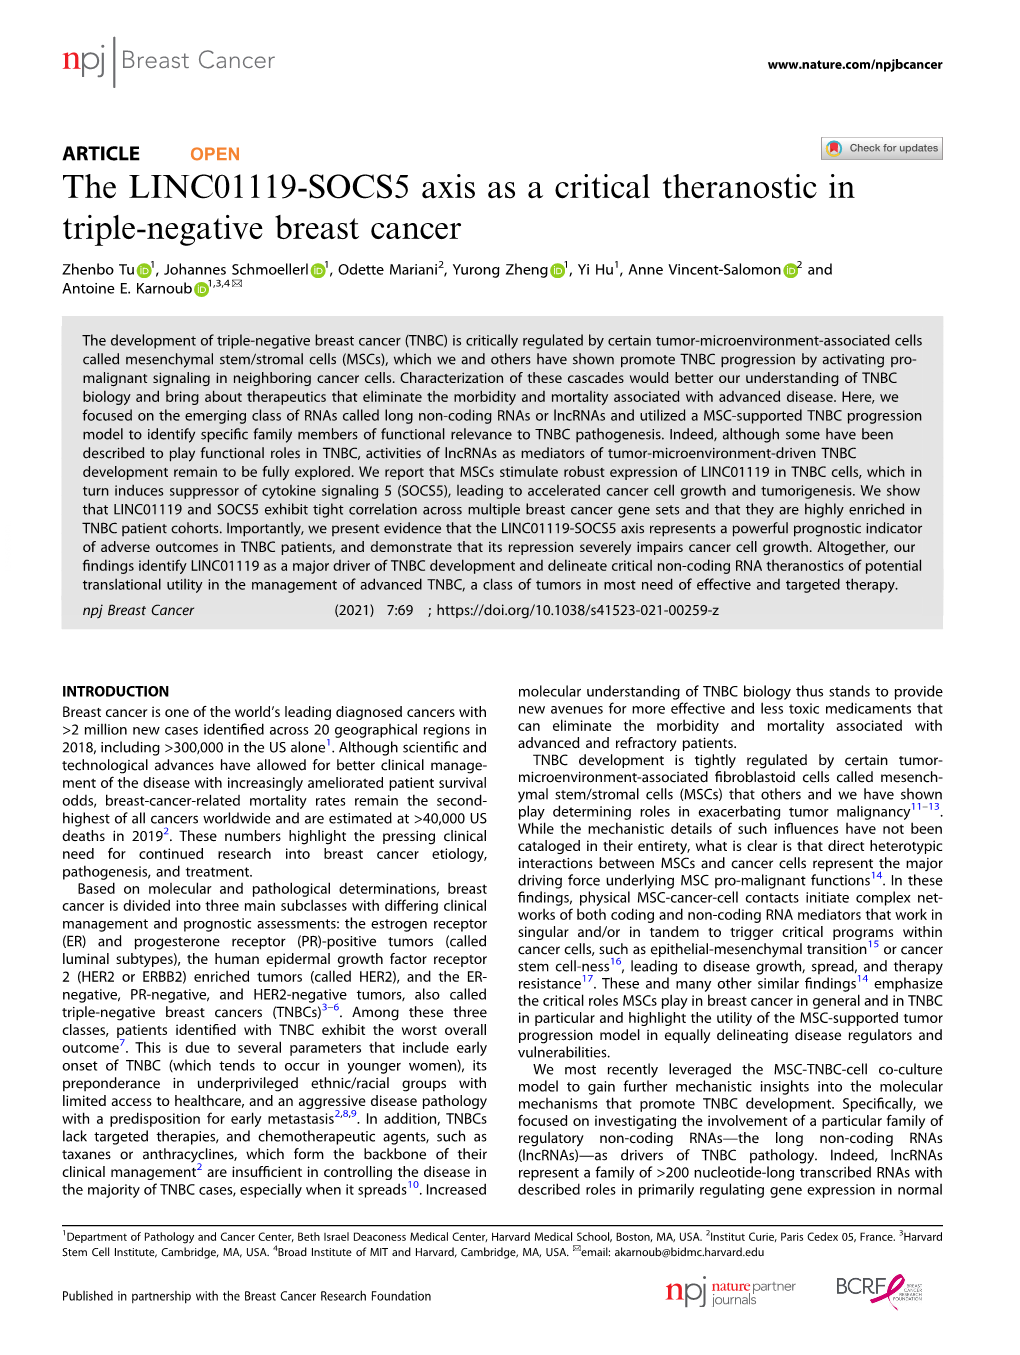 The LINC01119-SOCS5 Axis As a Critical Theranostic in Triple-Negative Breast Cancer